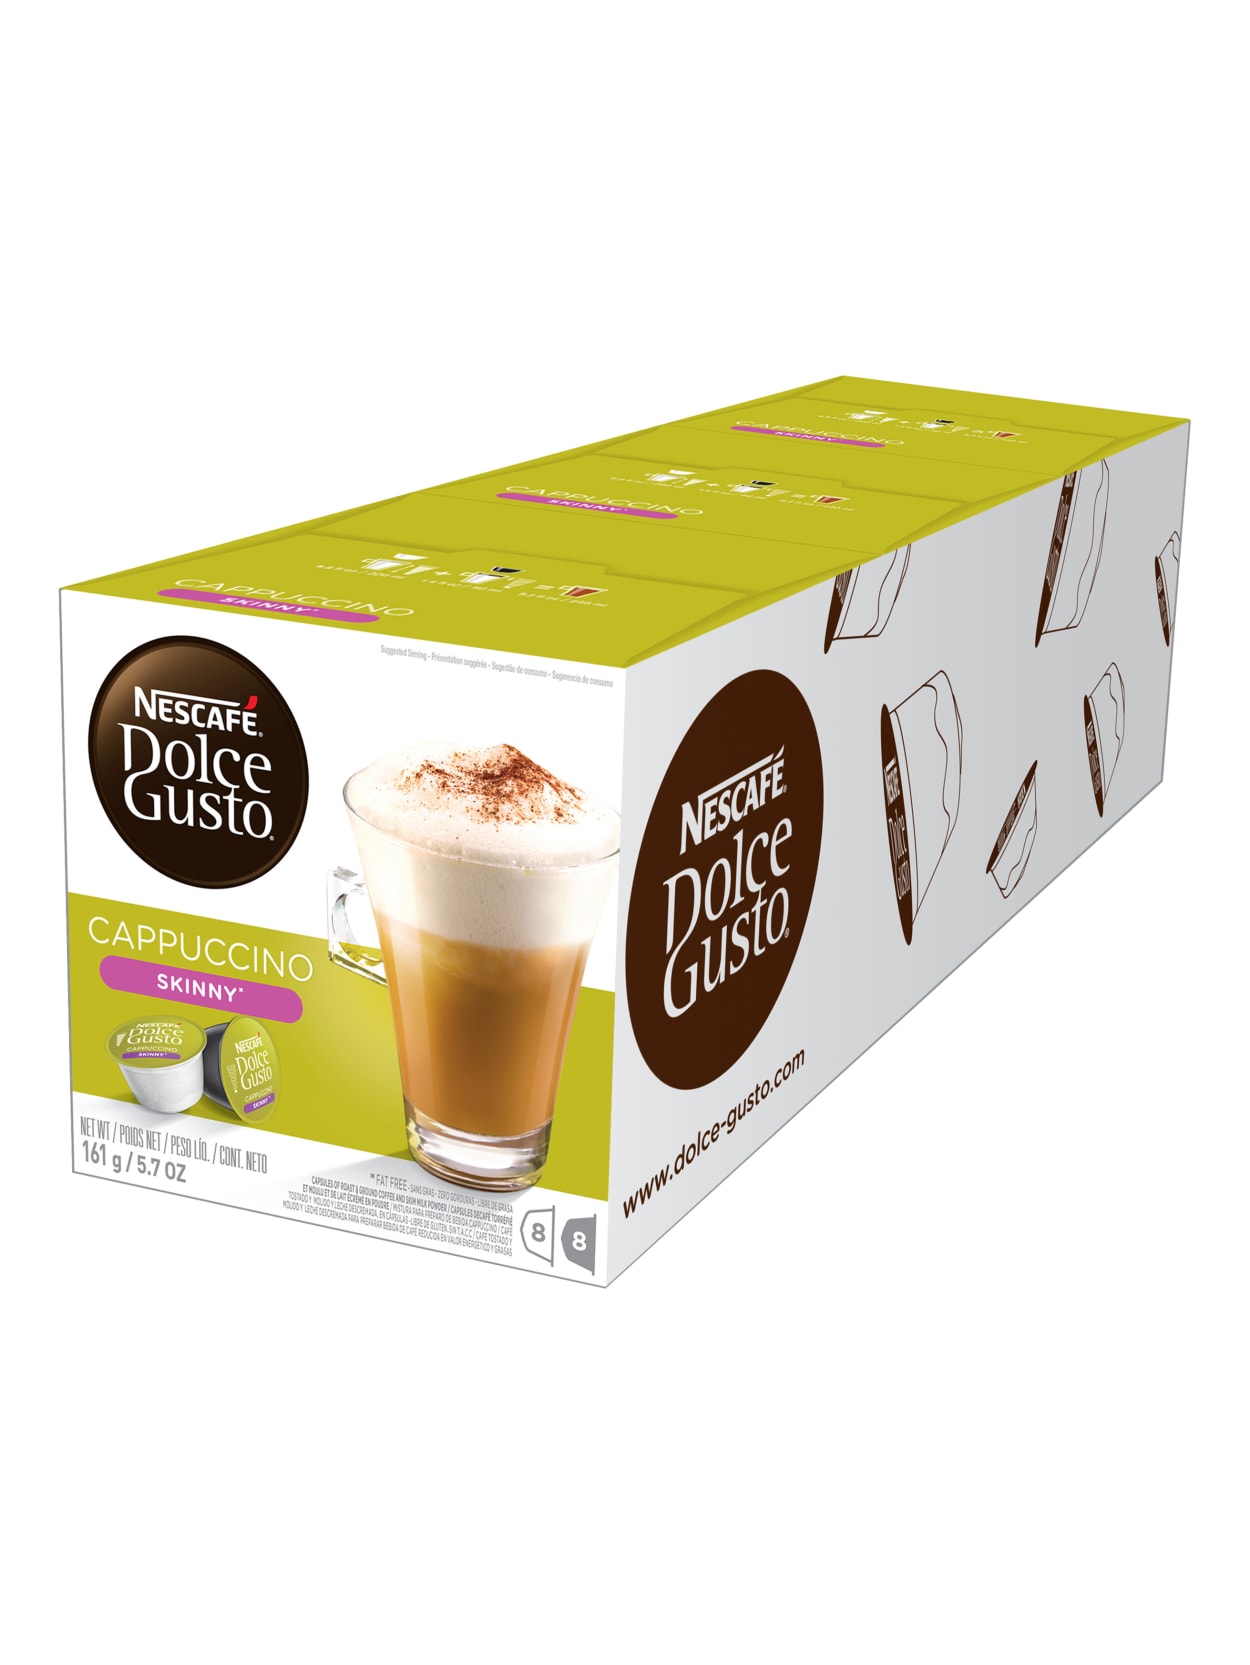 Dolce gusto cappuccino. Капсулы Dolce gusto Cappuccino skinny Light. Dolce gusto Cappuccino skinny. Nescafe Dolce gusto Cappuccino. Кофе в капсулах Nescafe Dolce gusto Cappuccino 8 порций.